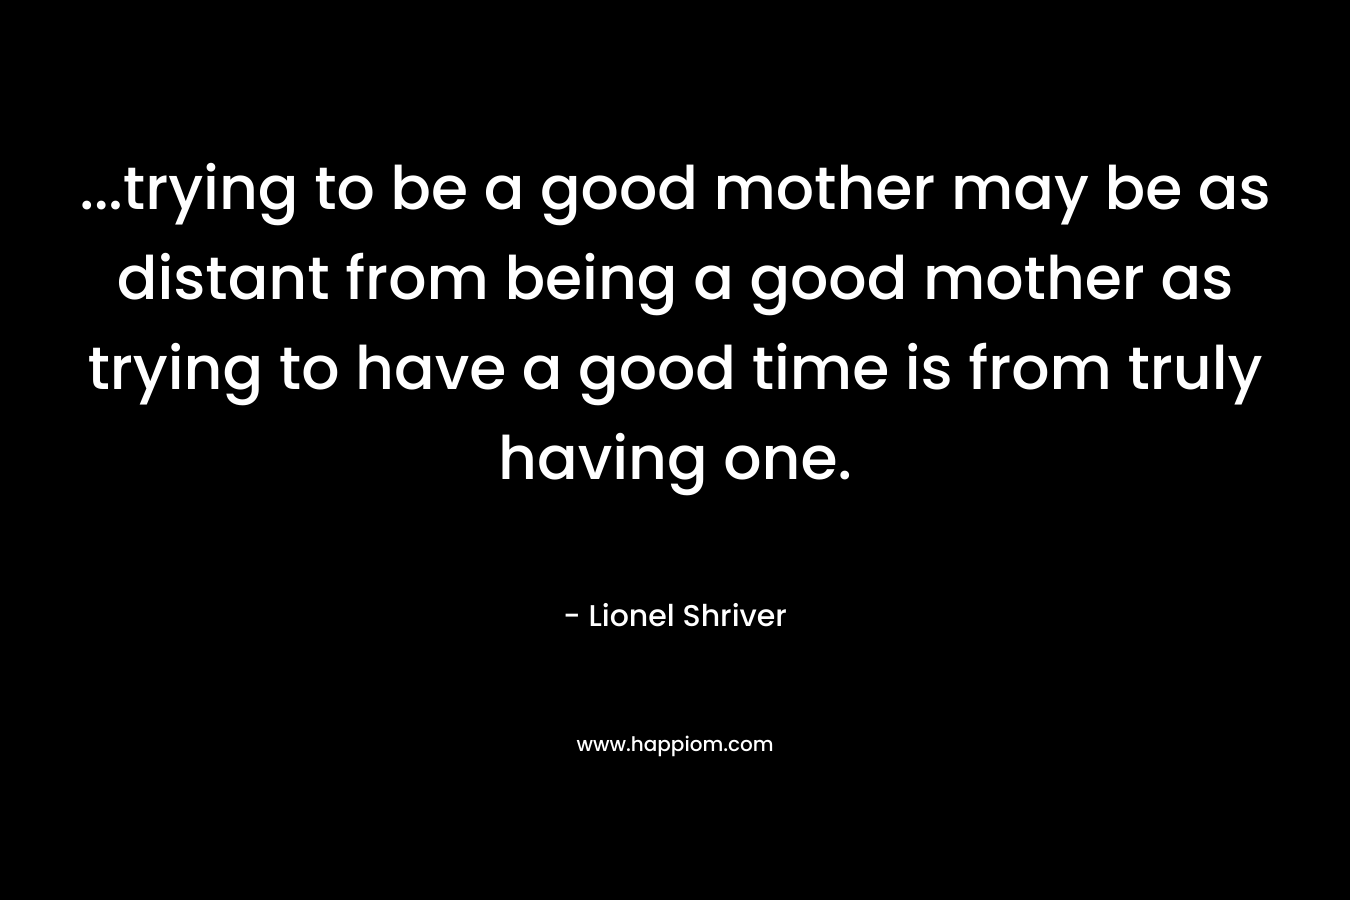 …trying to be a good mother may be as distant from being a good mother as trying to have a good time is from truly having one. – Lionel Shriver